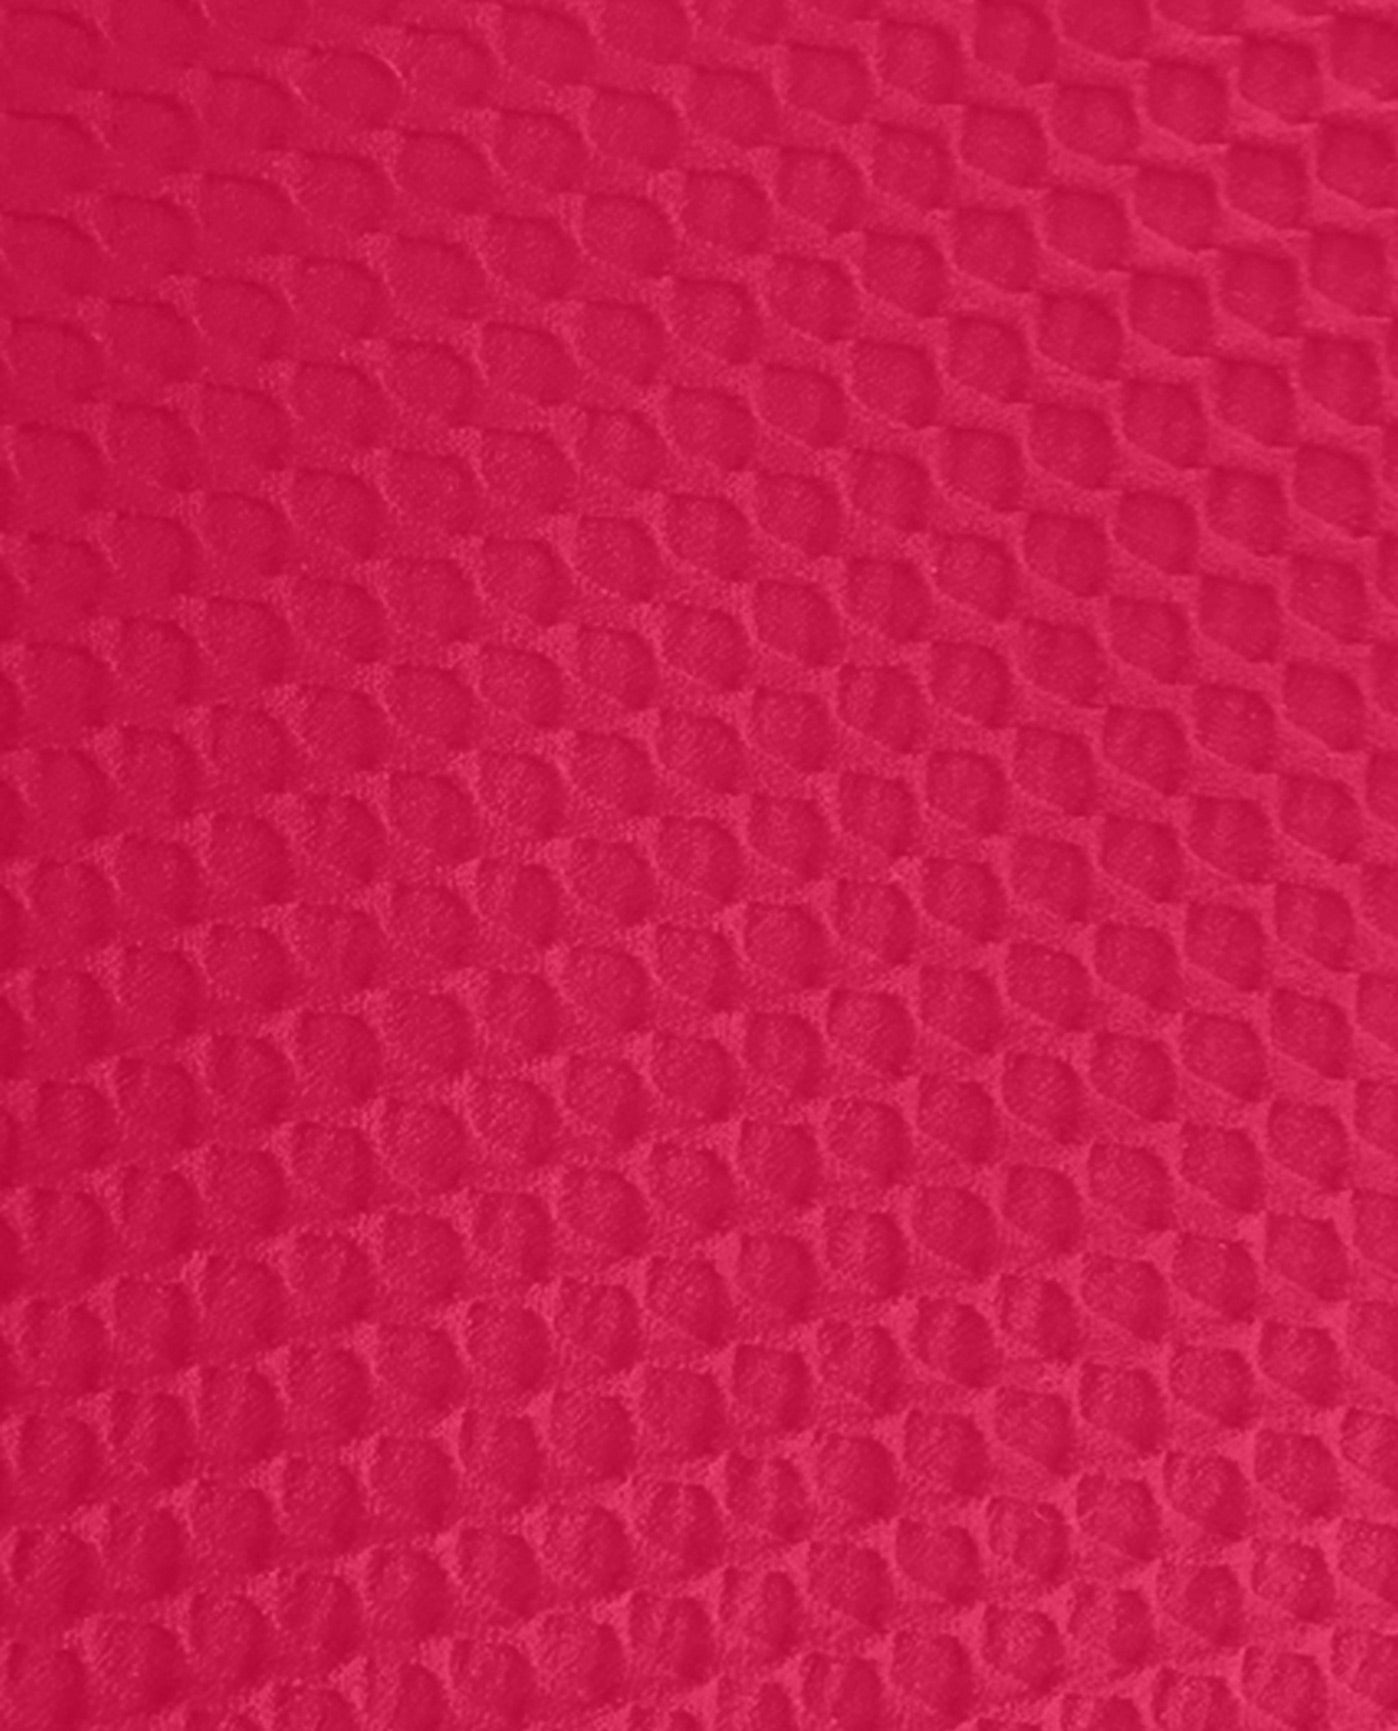 FABRIC SWATCH VIEW OF CHLORINE RESISTANT AQUAMORE SOLID TEXTURED SCOOP NECK ONE PIECE SWIMSUIT | 511 AQT TEXTURED RASPBERRY